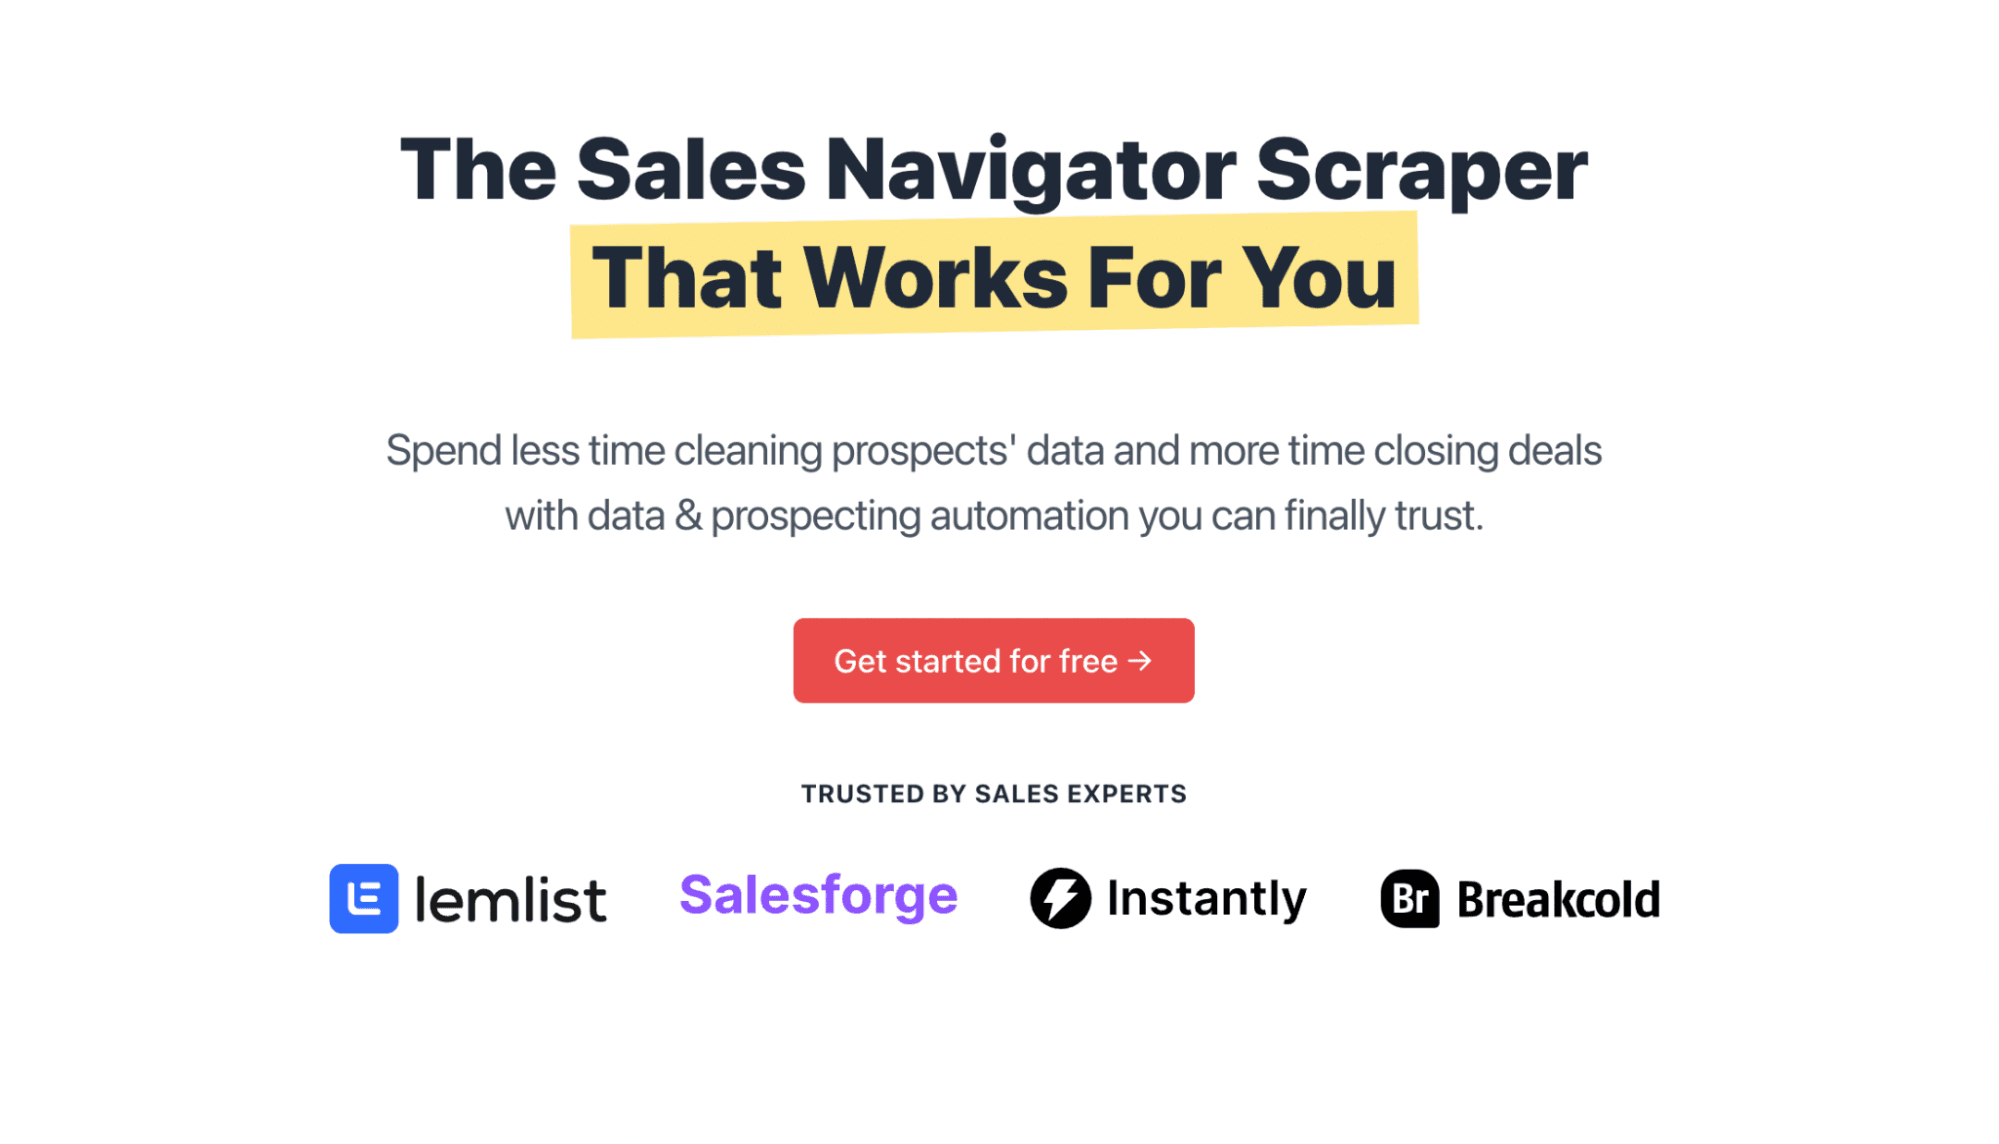 findymail sales navigator scraper product page - image19.png